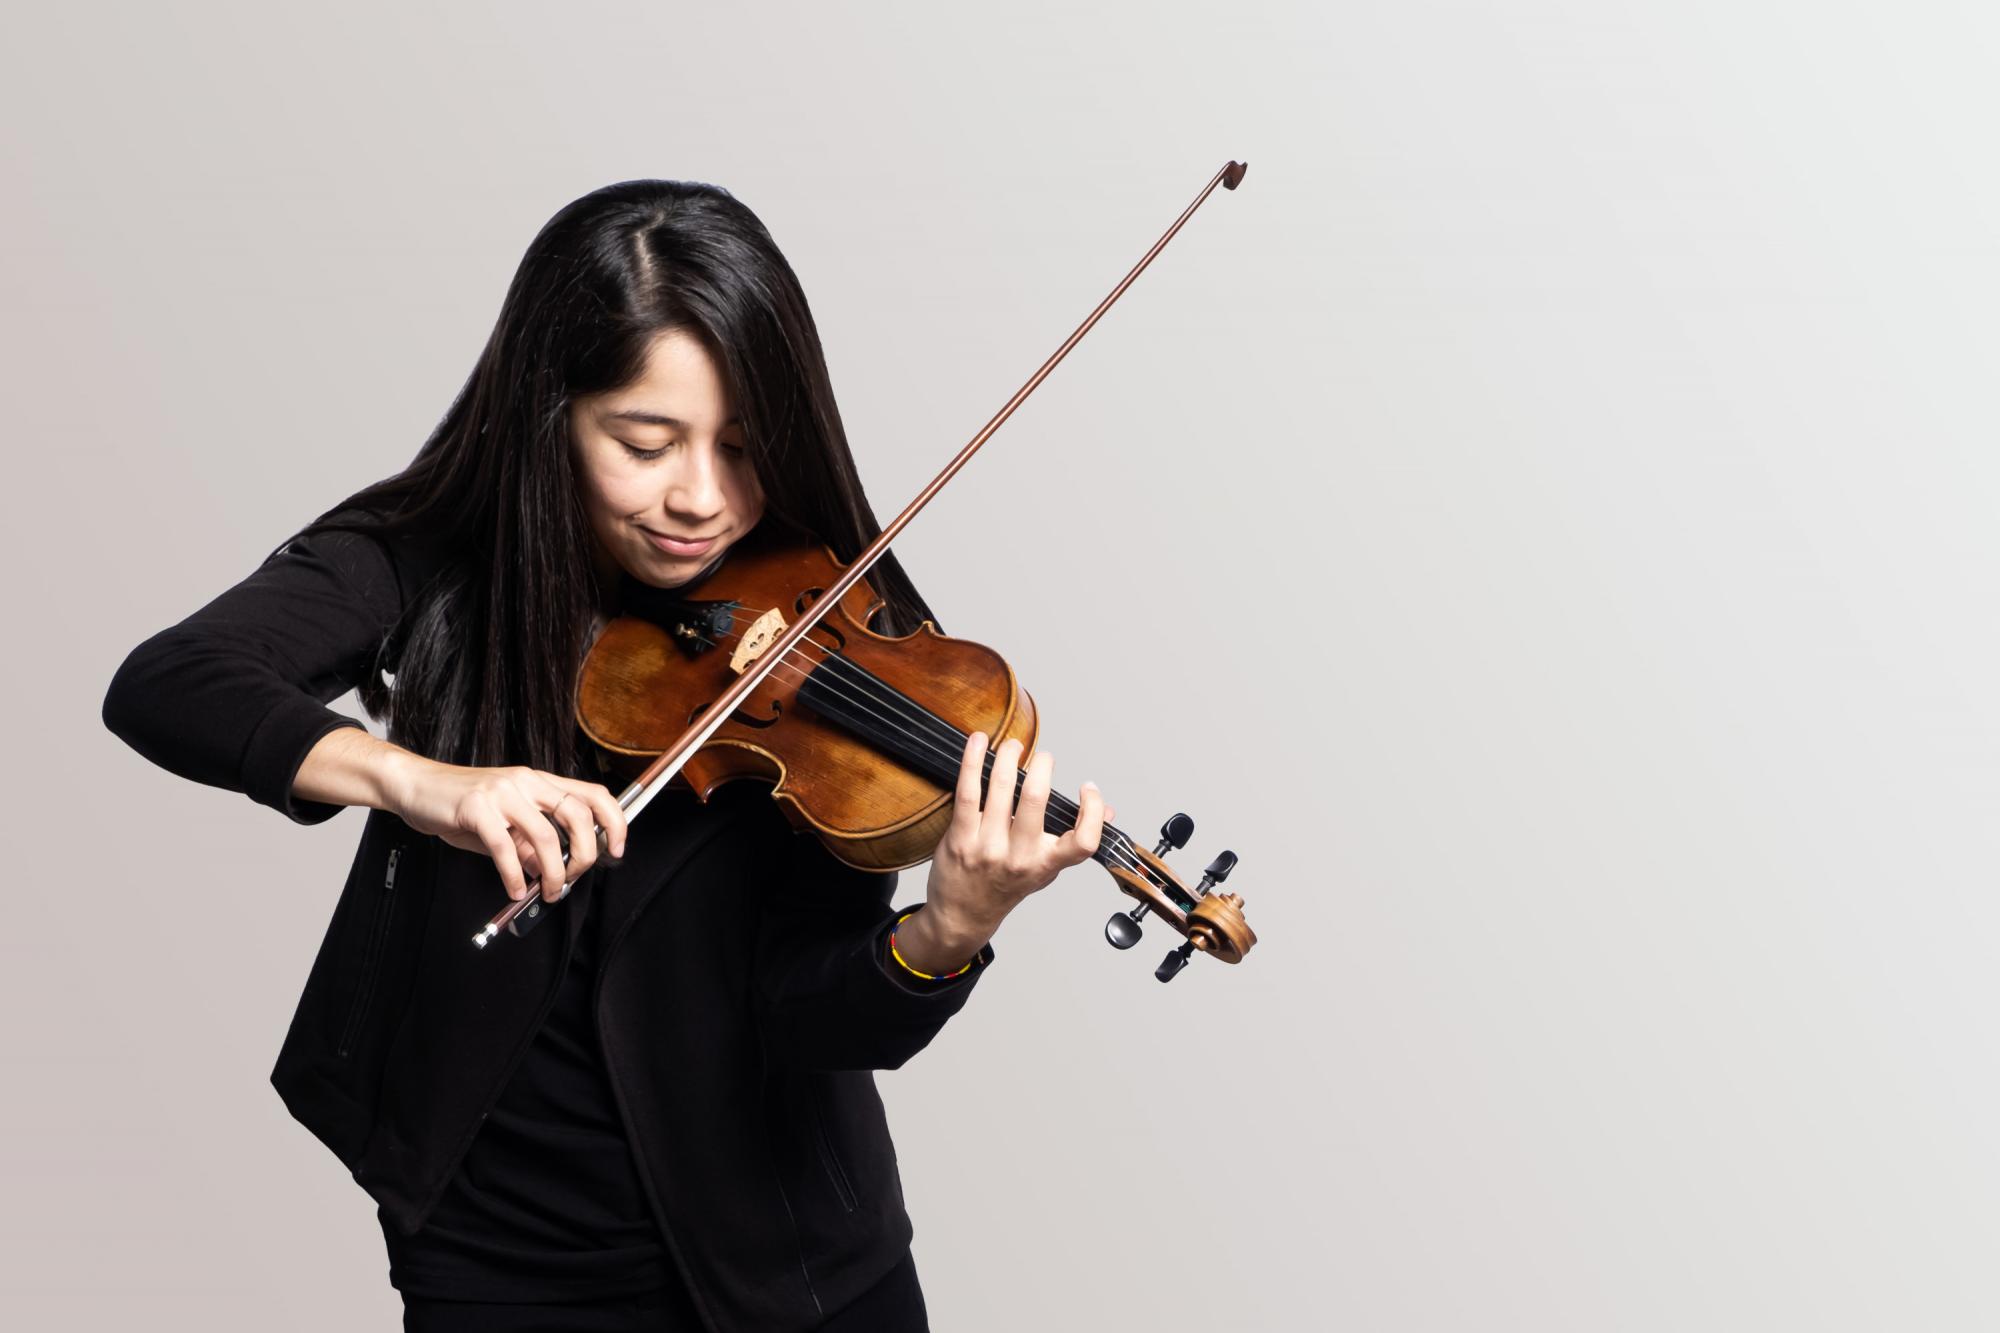 A Violinist playing her instrument